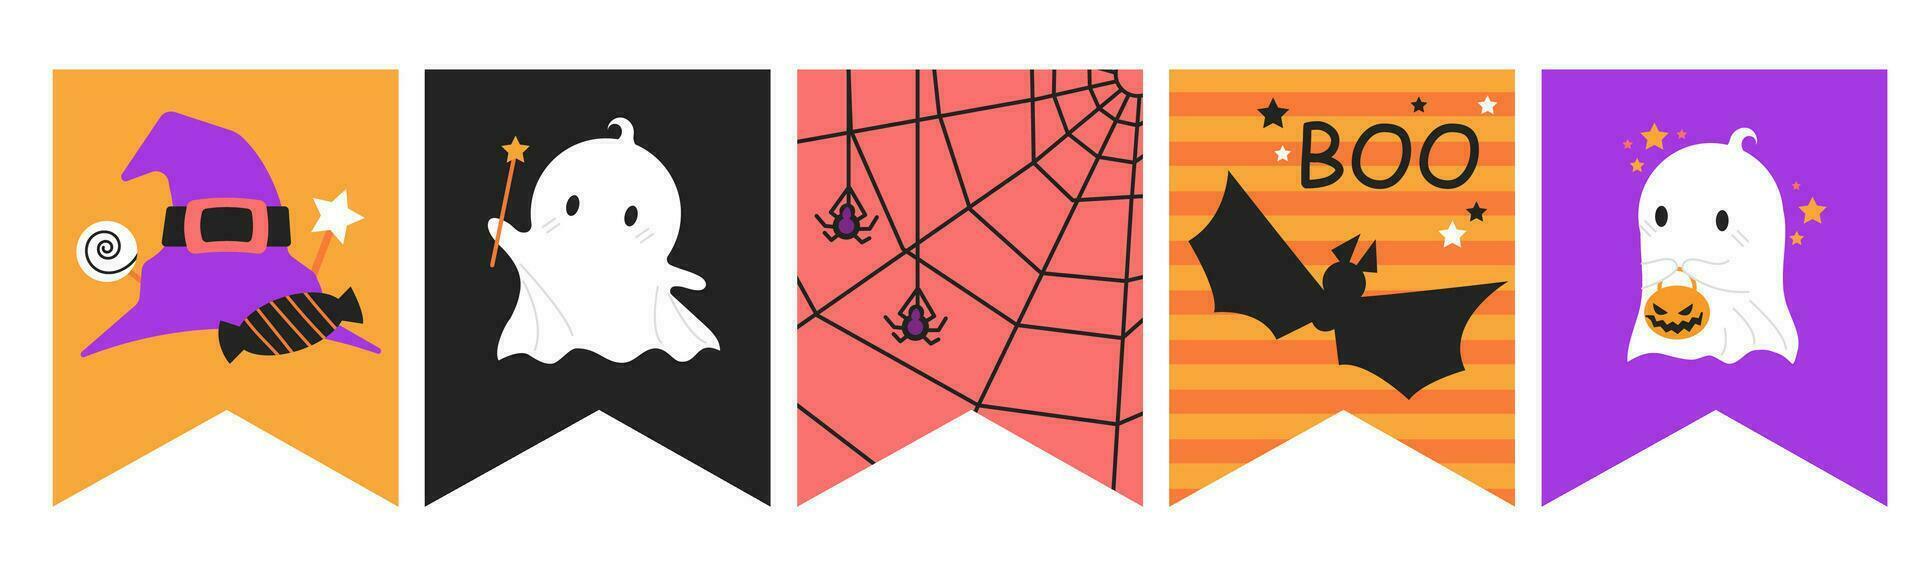 Cartoon ghost Halloween bunting design. 5 bright flag shapes with spooky decor. vector